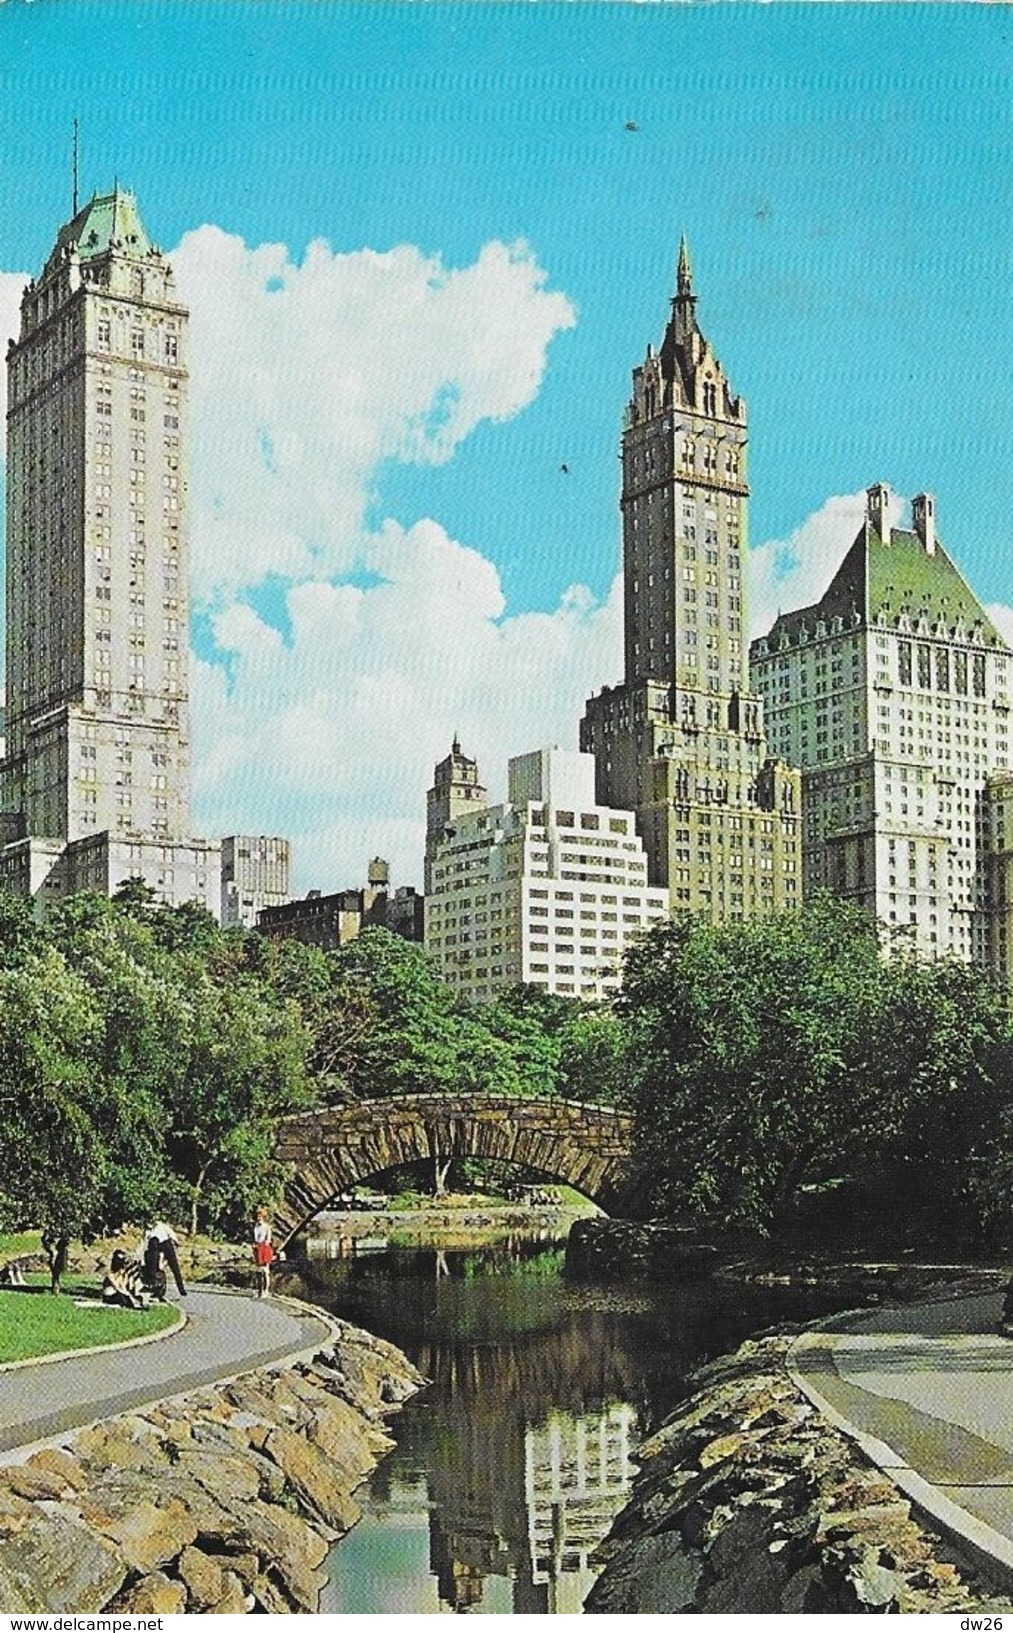 Central Park - New York City - Picturesque Bridge In The Heart Of Manhattan - Central Park